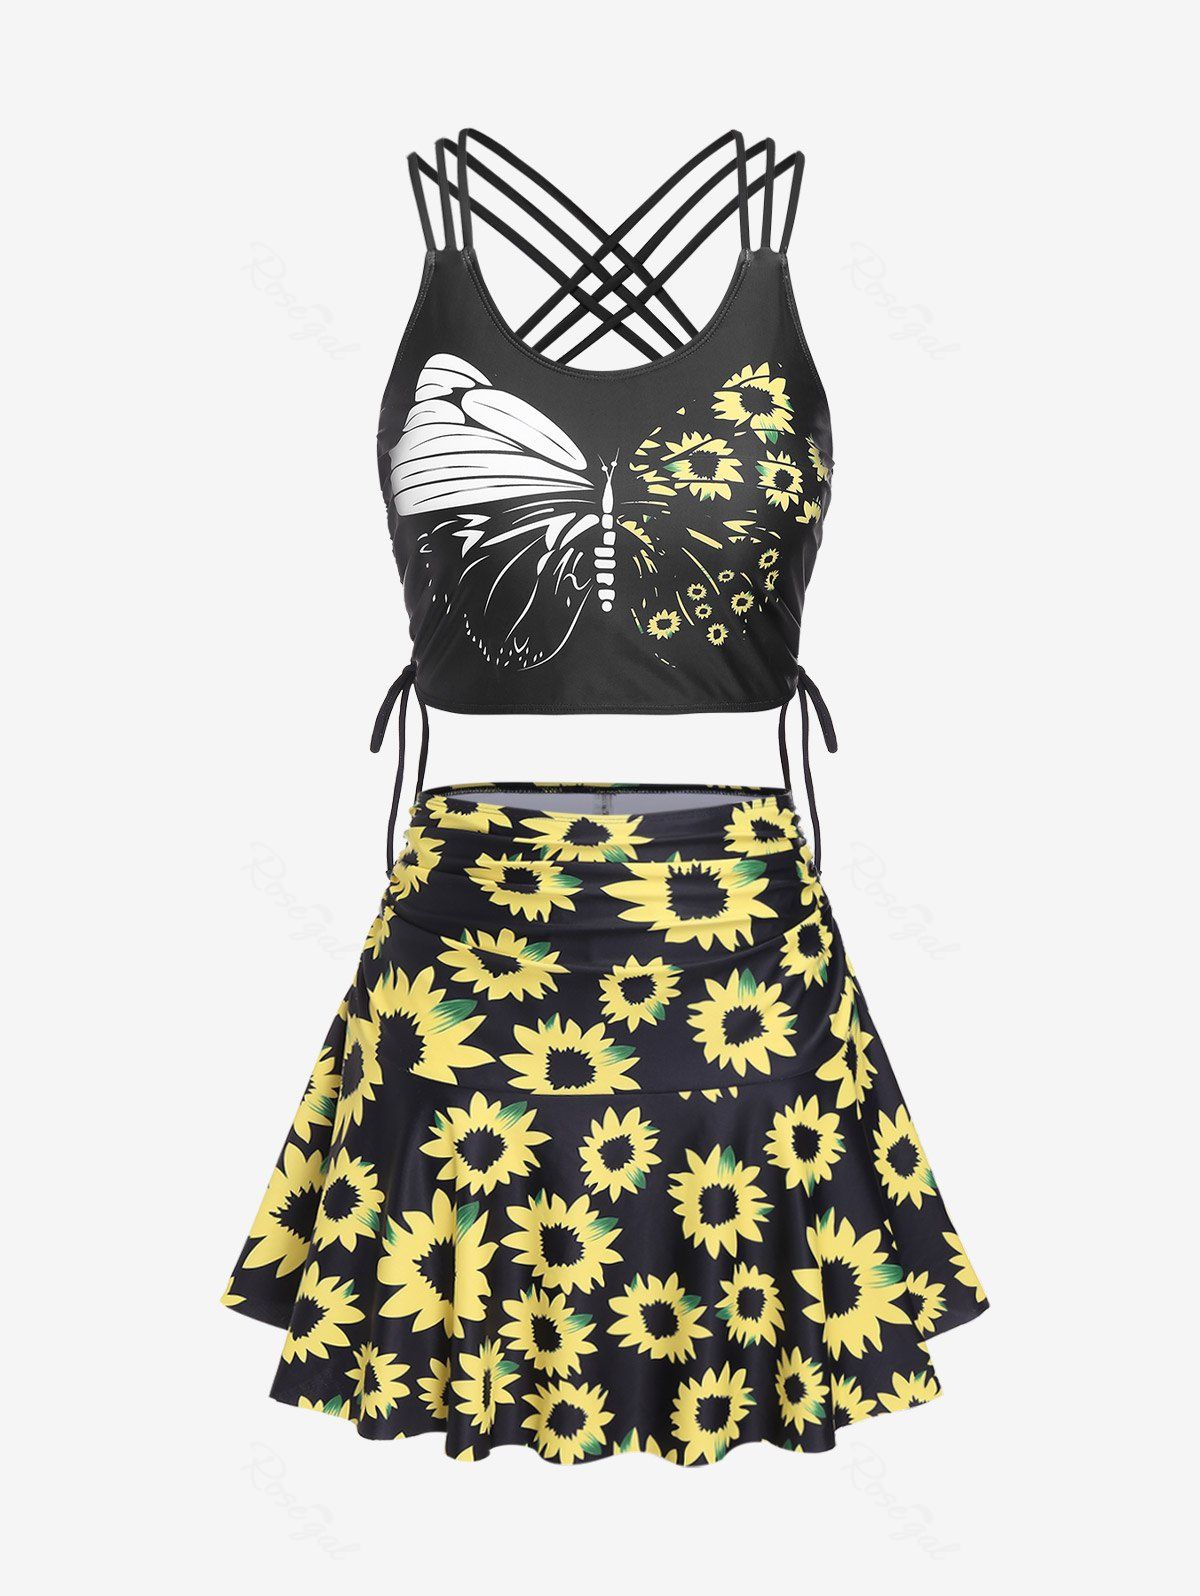 Chic Plus Size Sunflower Butterfly Print Crisscross Strappy Skirted Tankini Swimsuit  